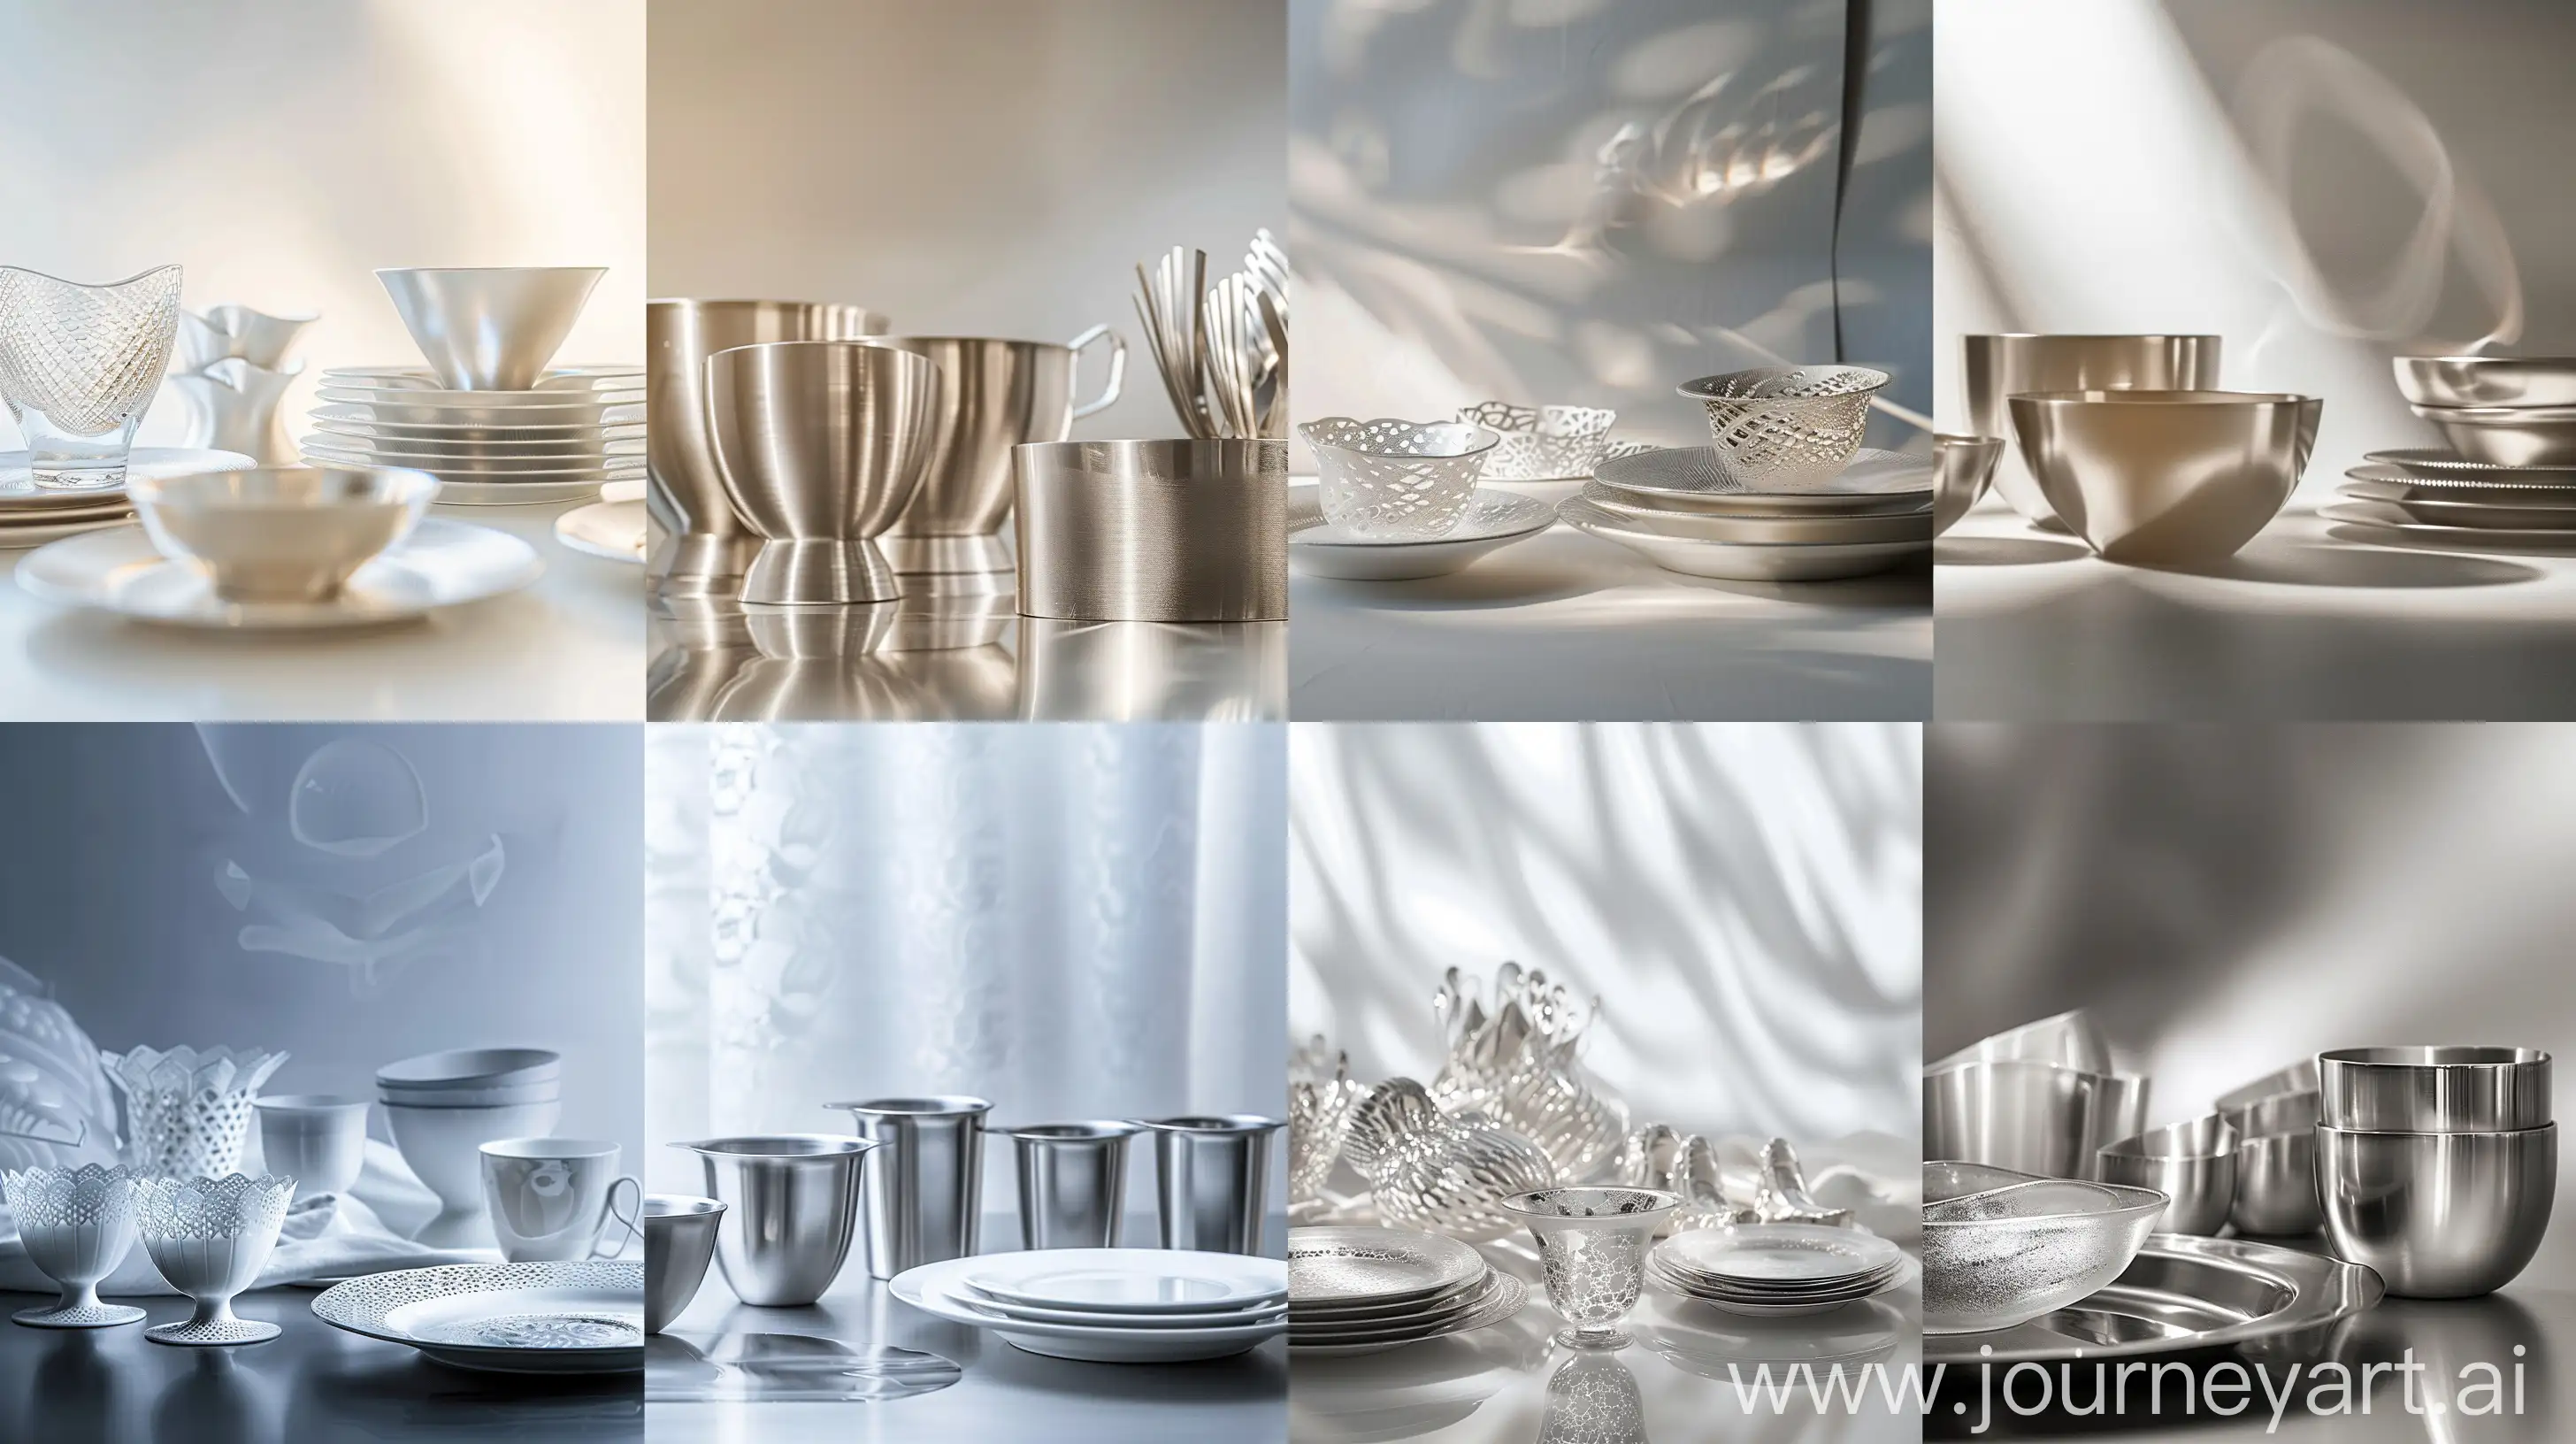 A high-resolution photograph showcasing the comparison between bioglass porcelain and stainless steel, highlighting their respective advantages and disadvantages. On the left side of the image, a set of bioglass porcelain dinnerware is elegantly arranged, emphasizing its ecological safety, corrosion resistance, and aesthetic appeal. Each piece exhibits intricate design details, showcasing the material's versatility and potential for customized designs. On the right side, a collection of stainless steel kitchenware is displayed, showcasing its strength, durability, and resistance to high temperatures and mechanical damage. The composition is balanced, with equal emphasis on both materials, allowing viewers to visually compare their attributes. Soft, diffused lighting enhances the textures and details of each material, while the background remains neutral to draw attention to the focal point.  --ar 16:9